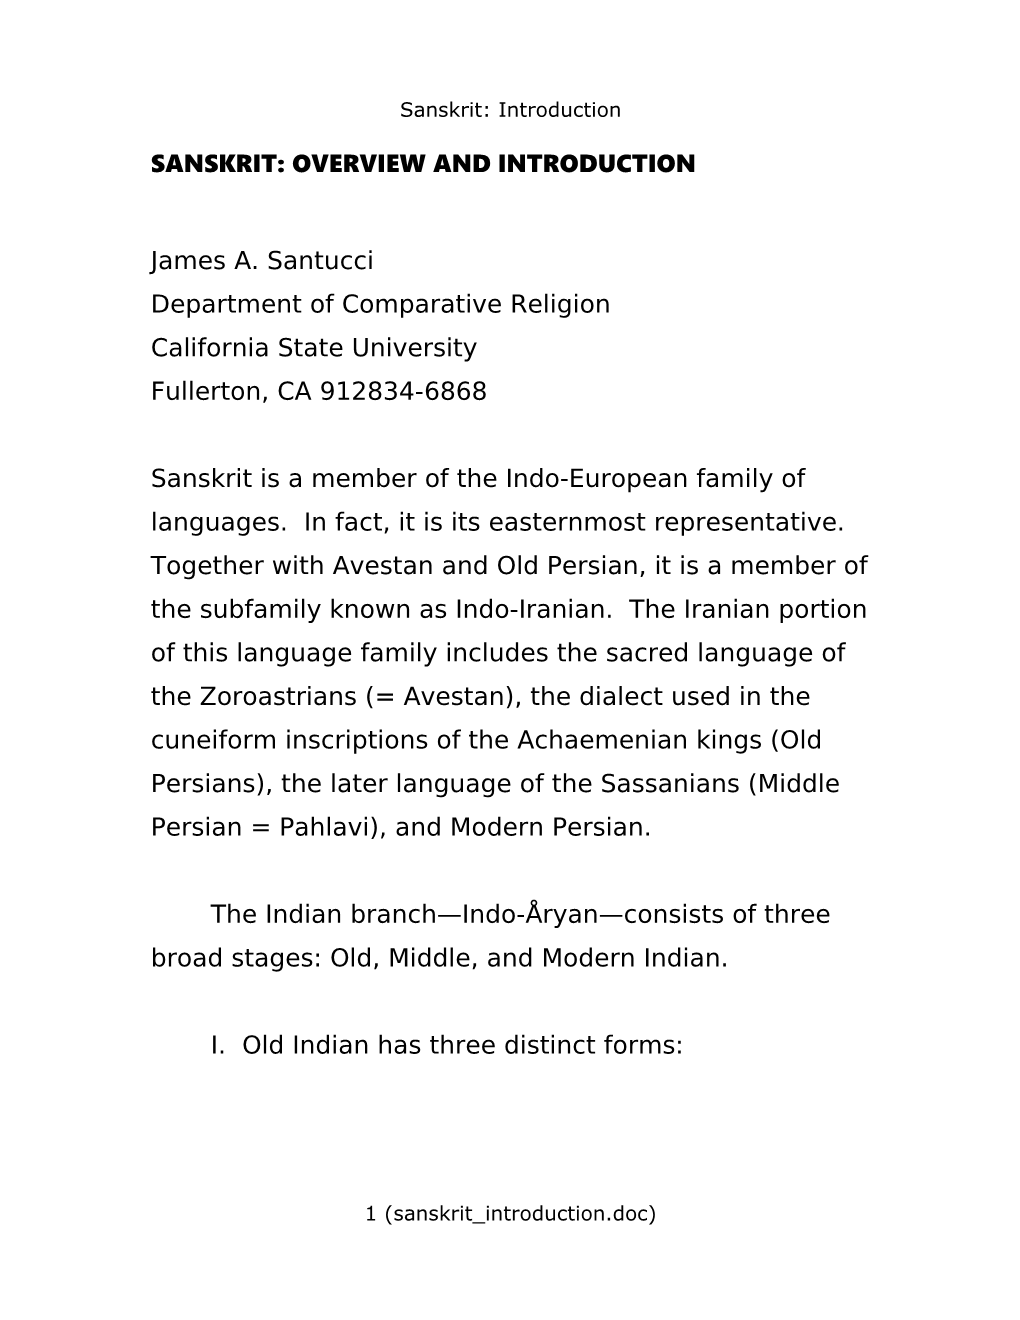 Sanskrit: Overview and Introduction